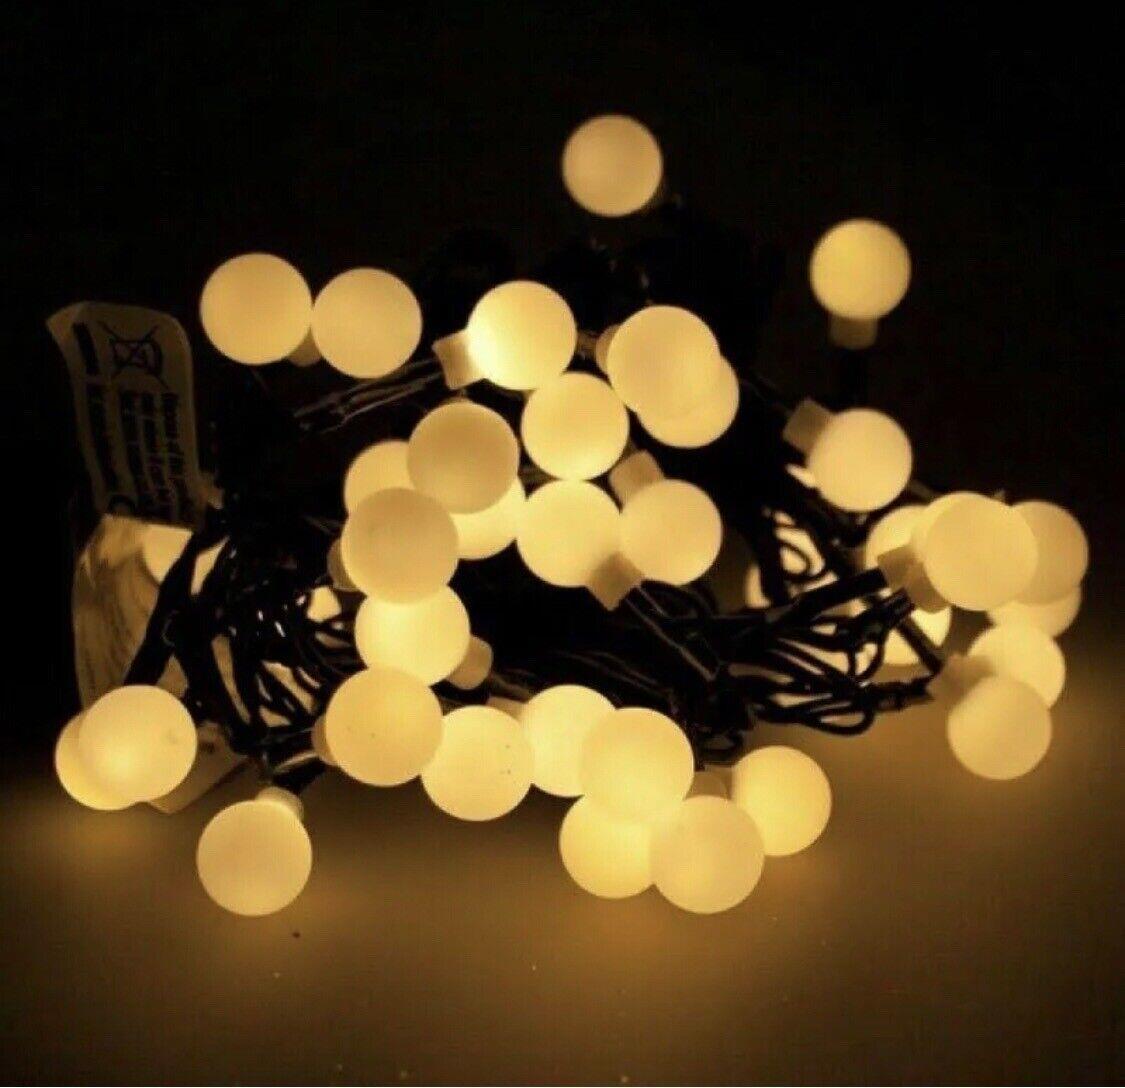 100 Berry Christmas LED Lights Warm White by Geezy - The Magic Toy Shop